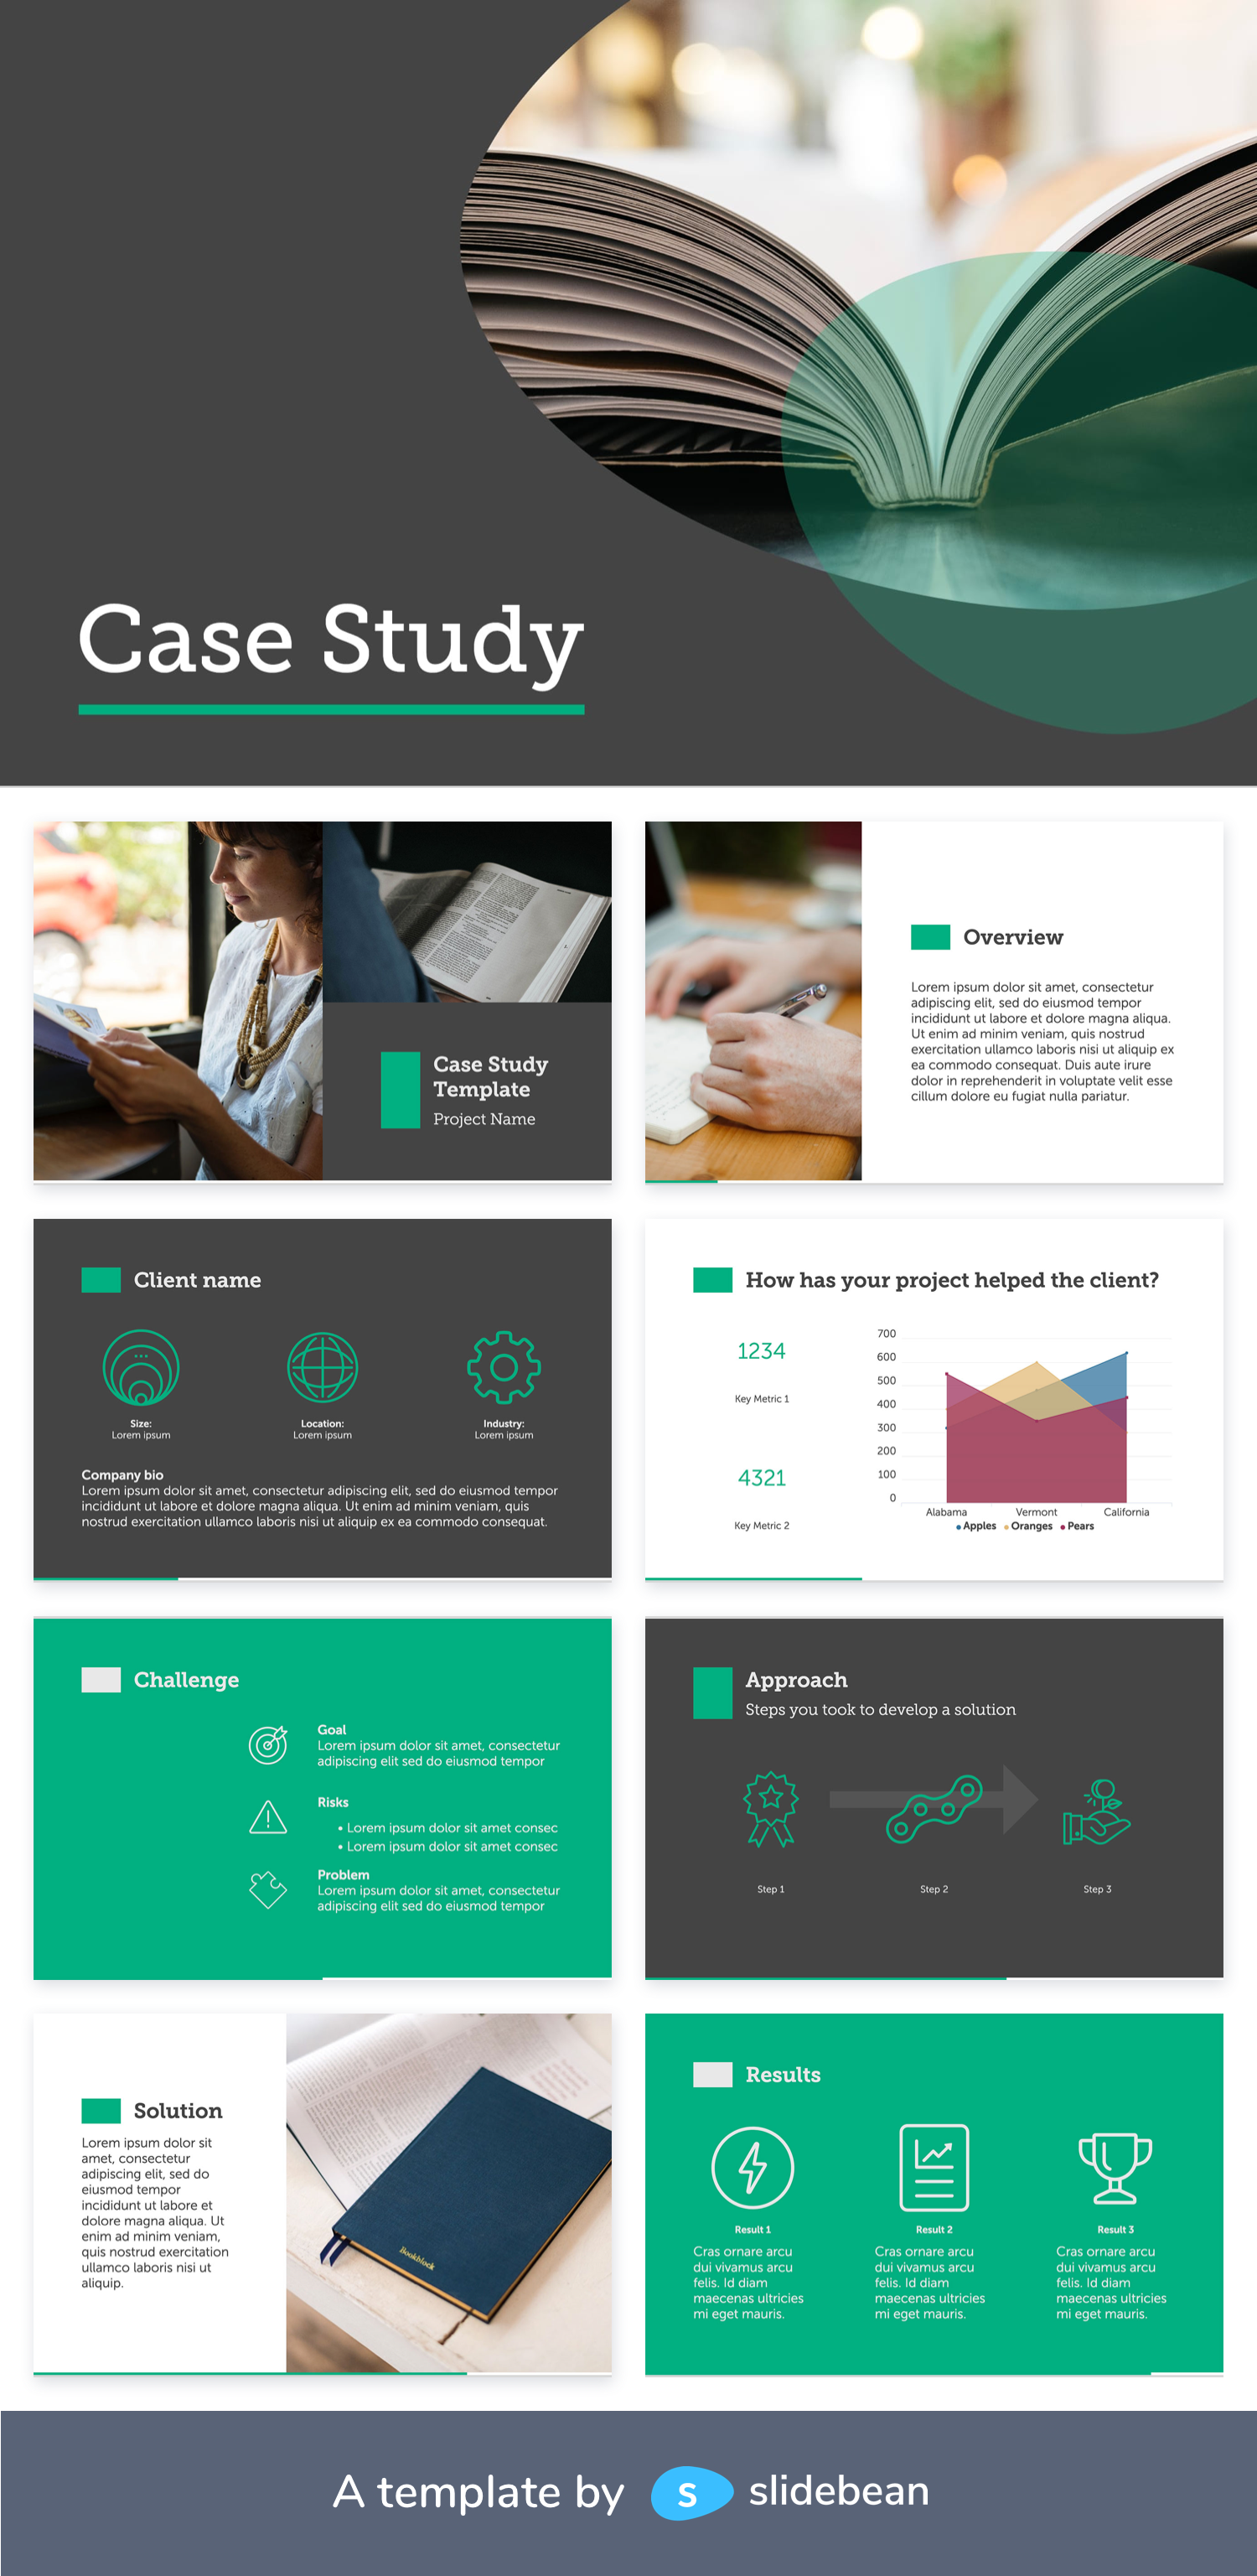 Case Study Powerpoint Template Free Pdf Ppt Download Slidebean Case Study Template Case Study Design Case Study